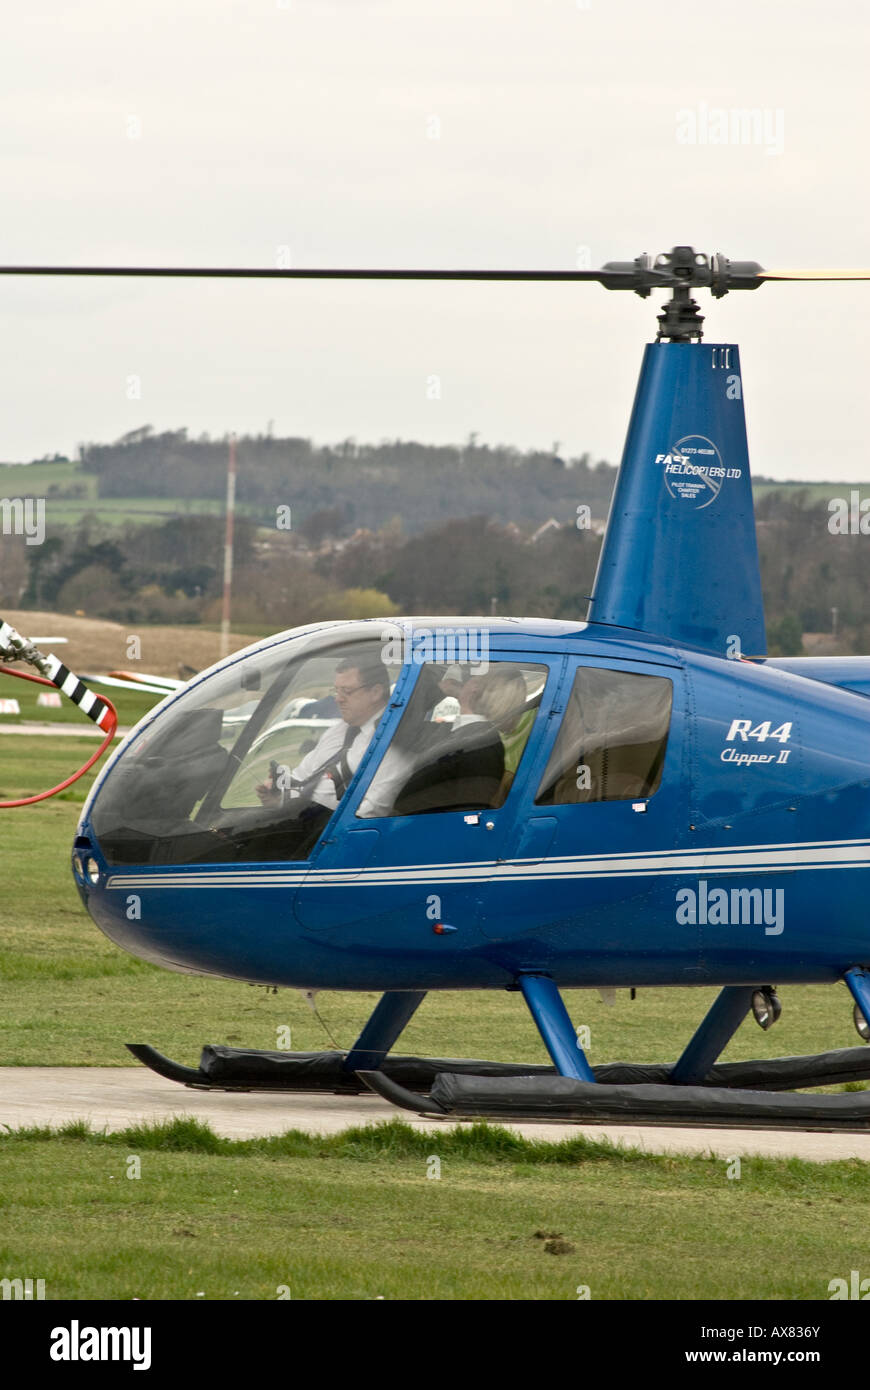 Commercial Helicopter Pilot Training Stock Photo